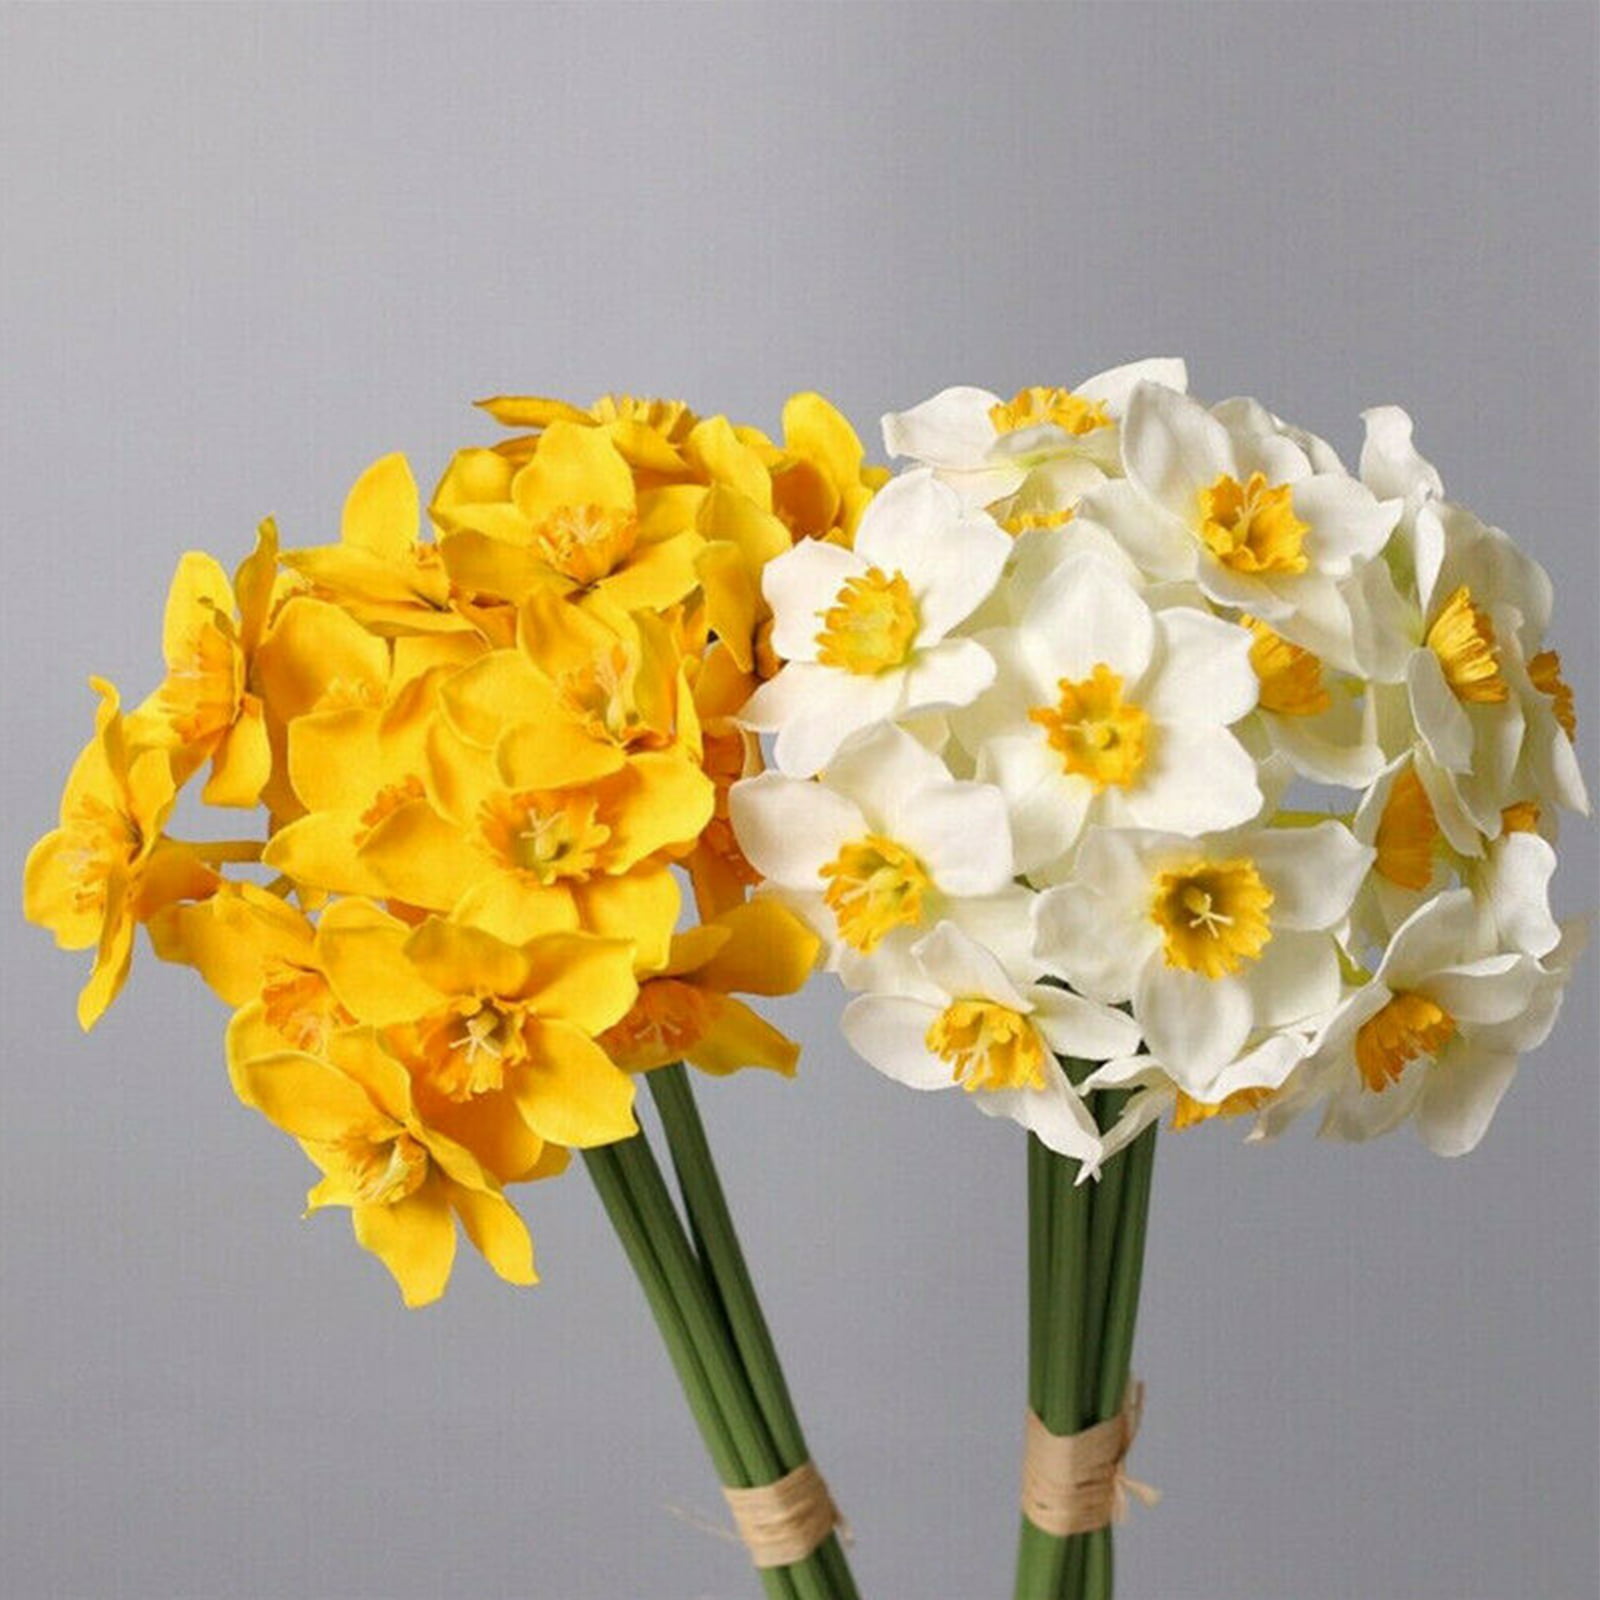 Floral Hair Accessories Yellow Narcissus Bush with Green Leaves Flower Supplies Fake Artificial Silk Daffodil Yellow Artificial Flowers